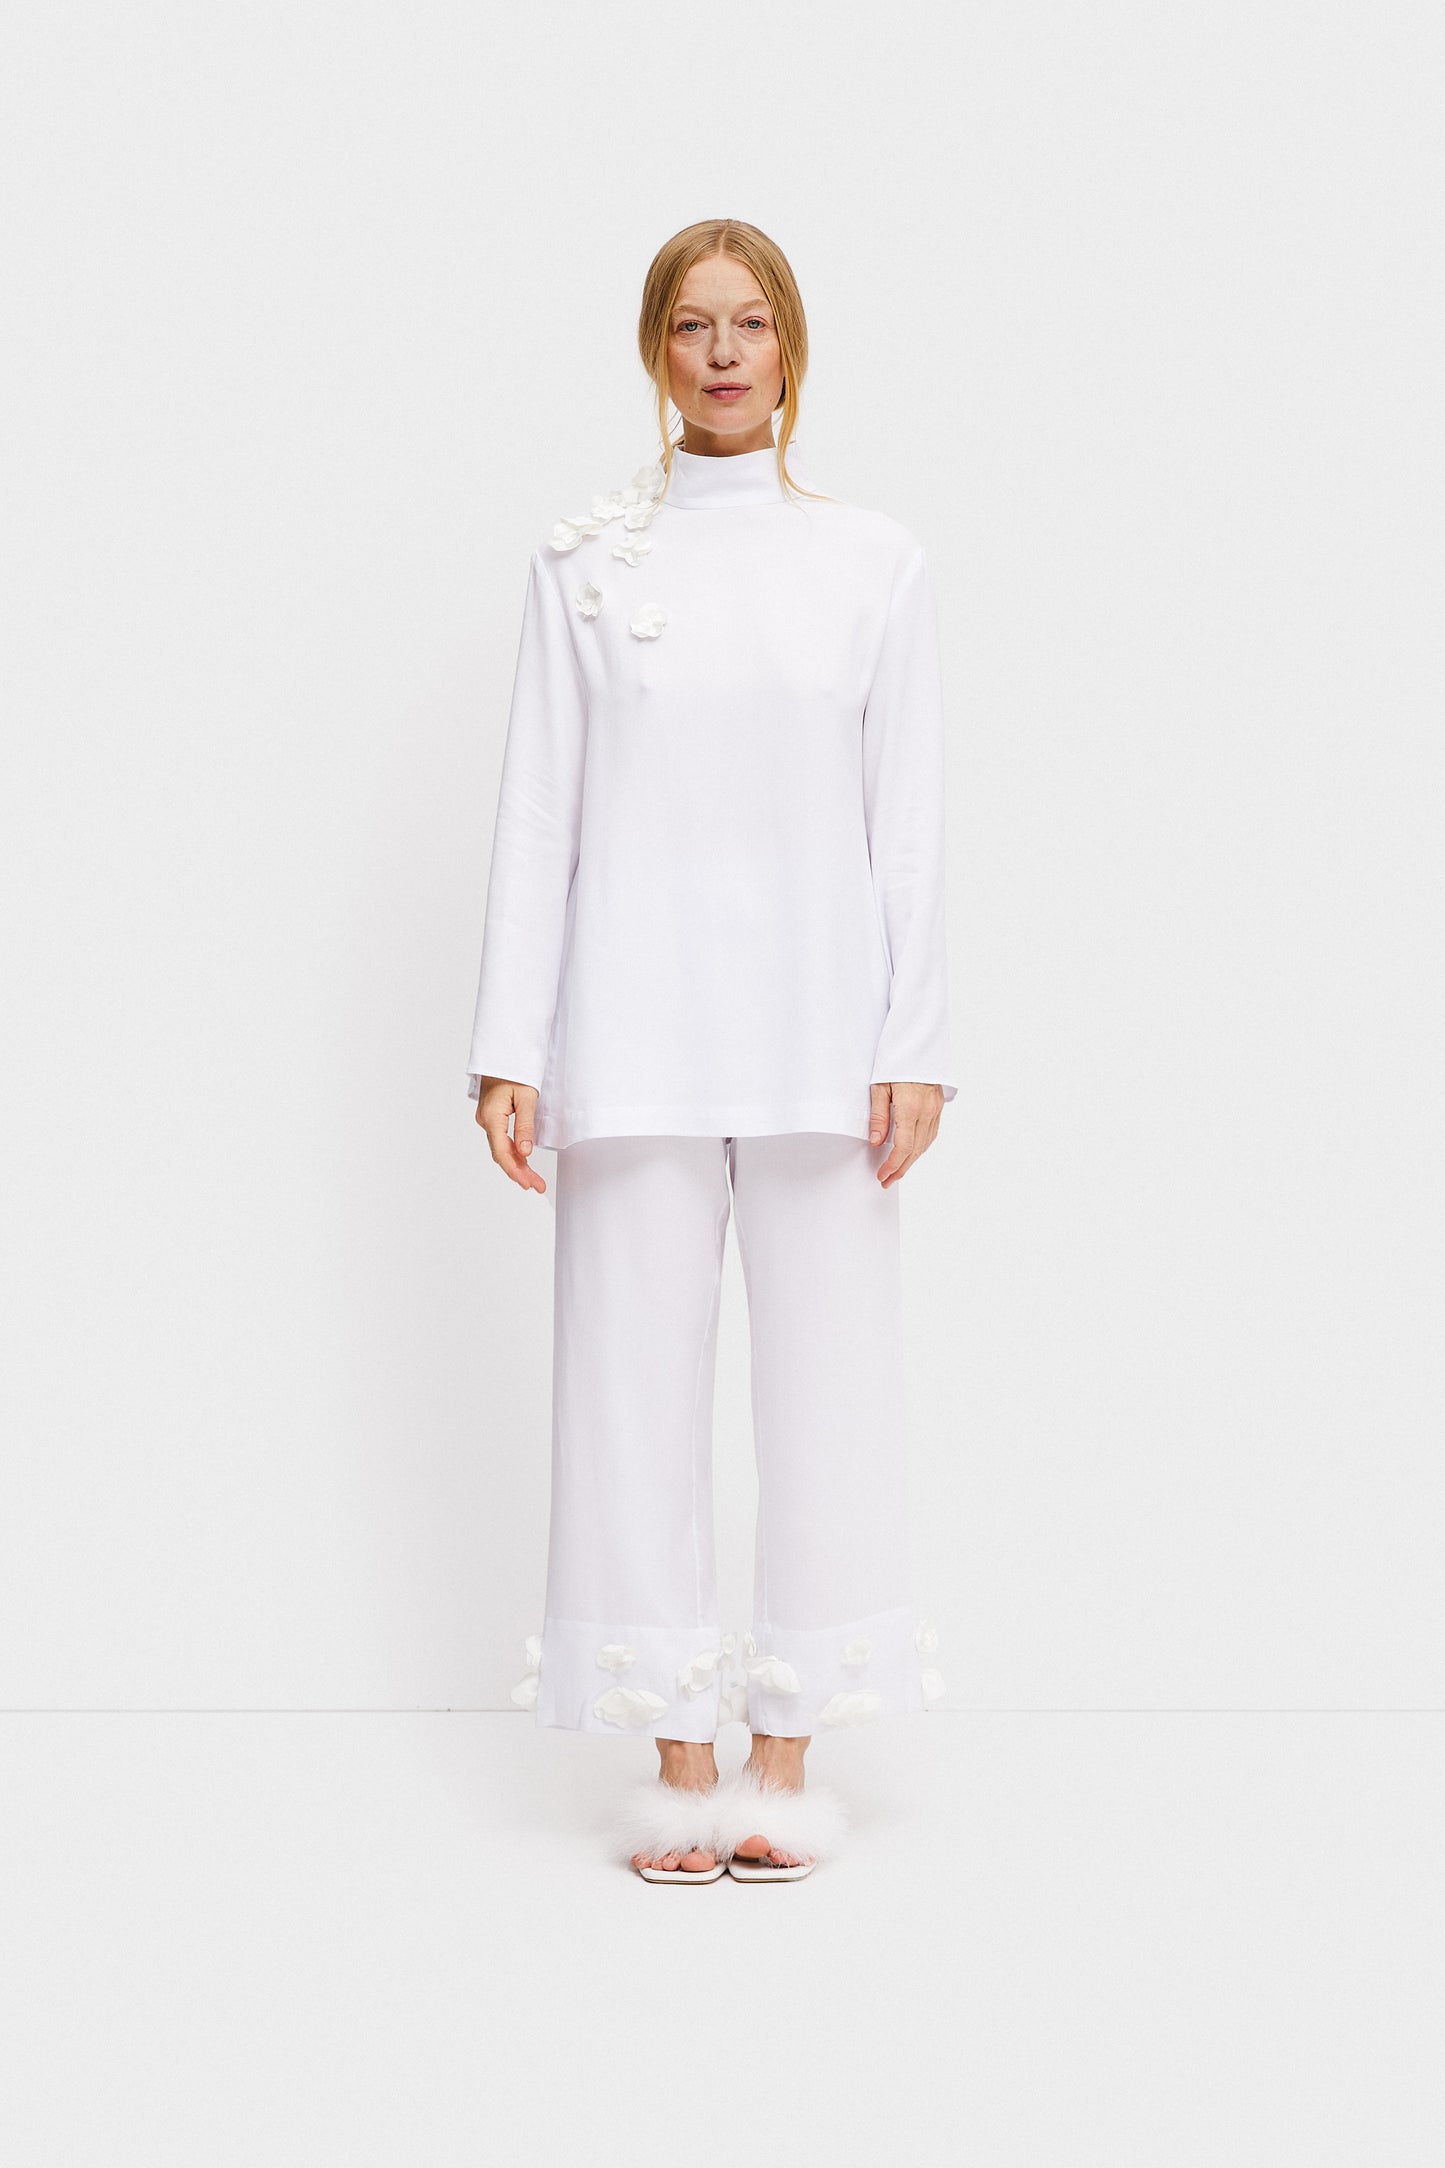 The Bloom Black Tie Pajamas Set with Pants in White